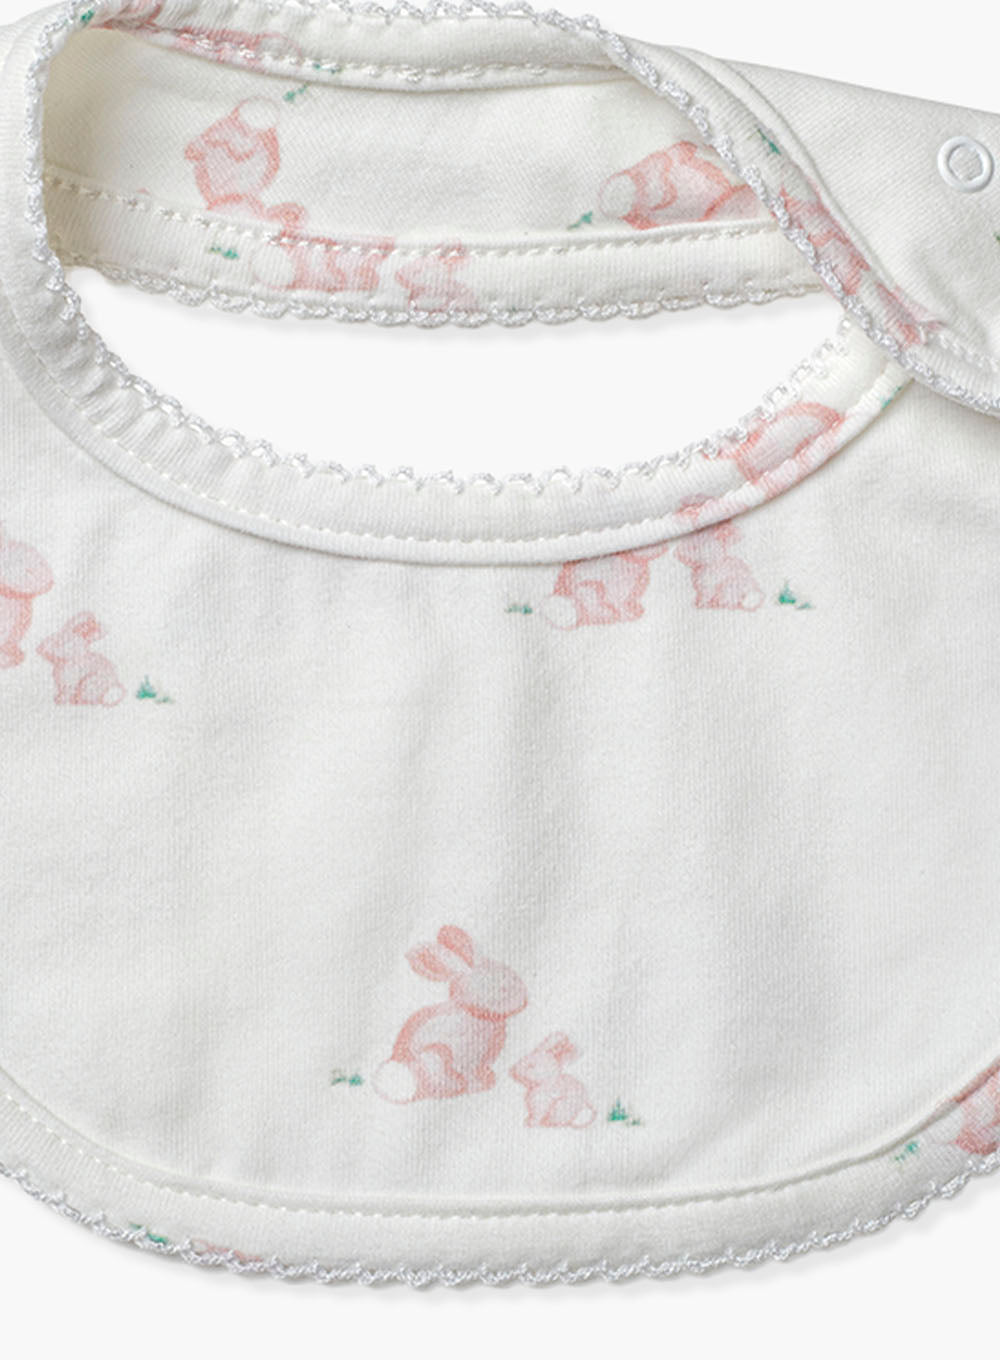 Baby Bib In Pale Pink Bunny